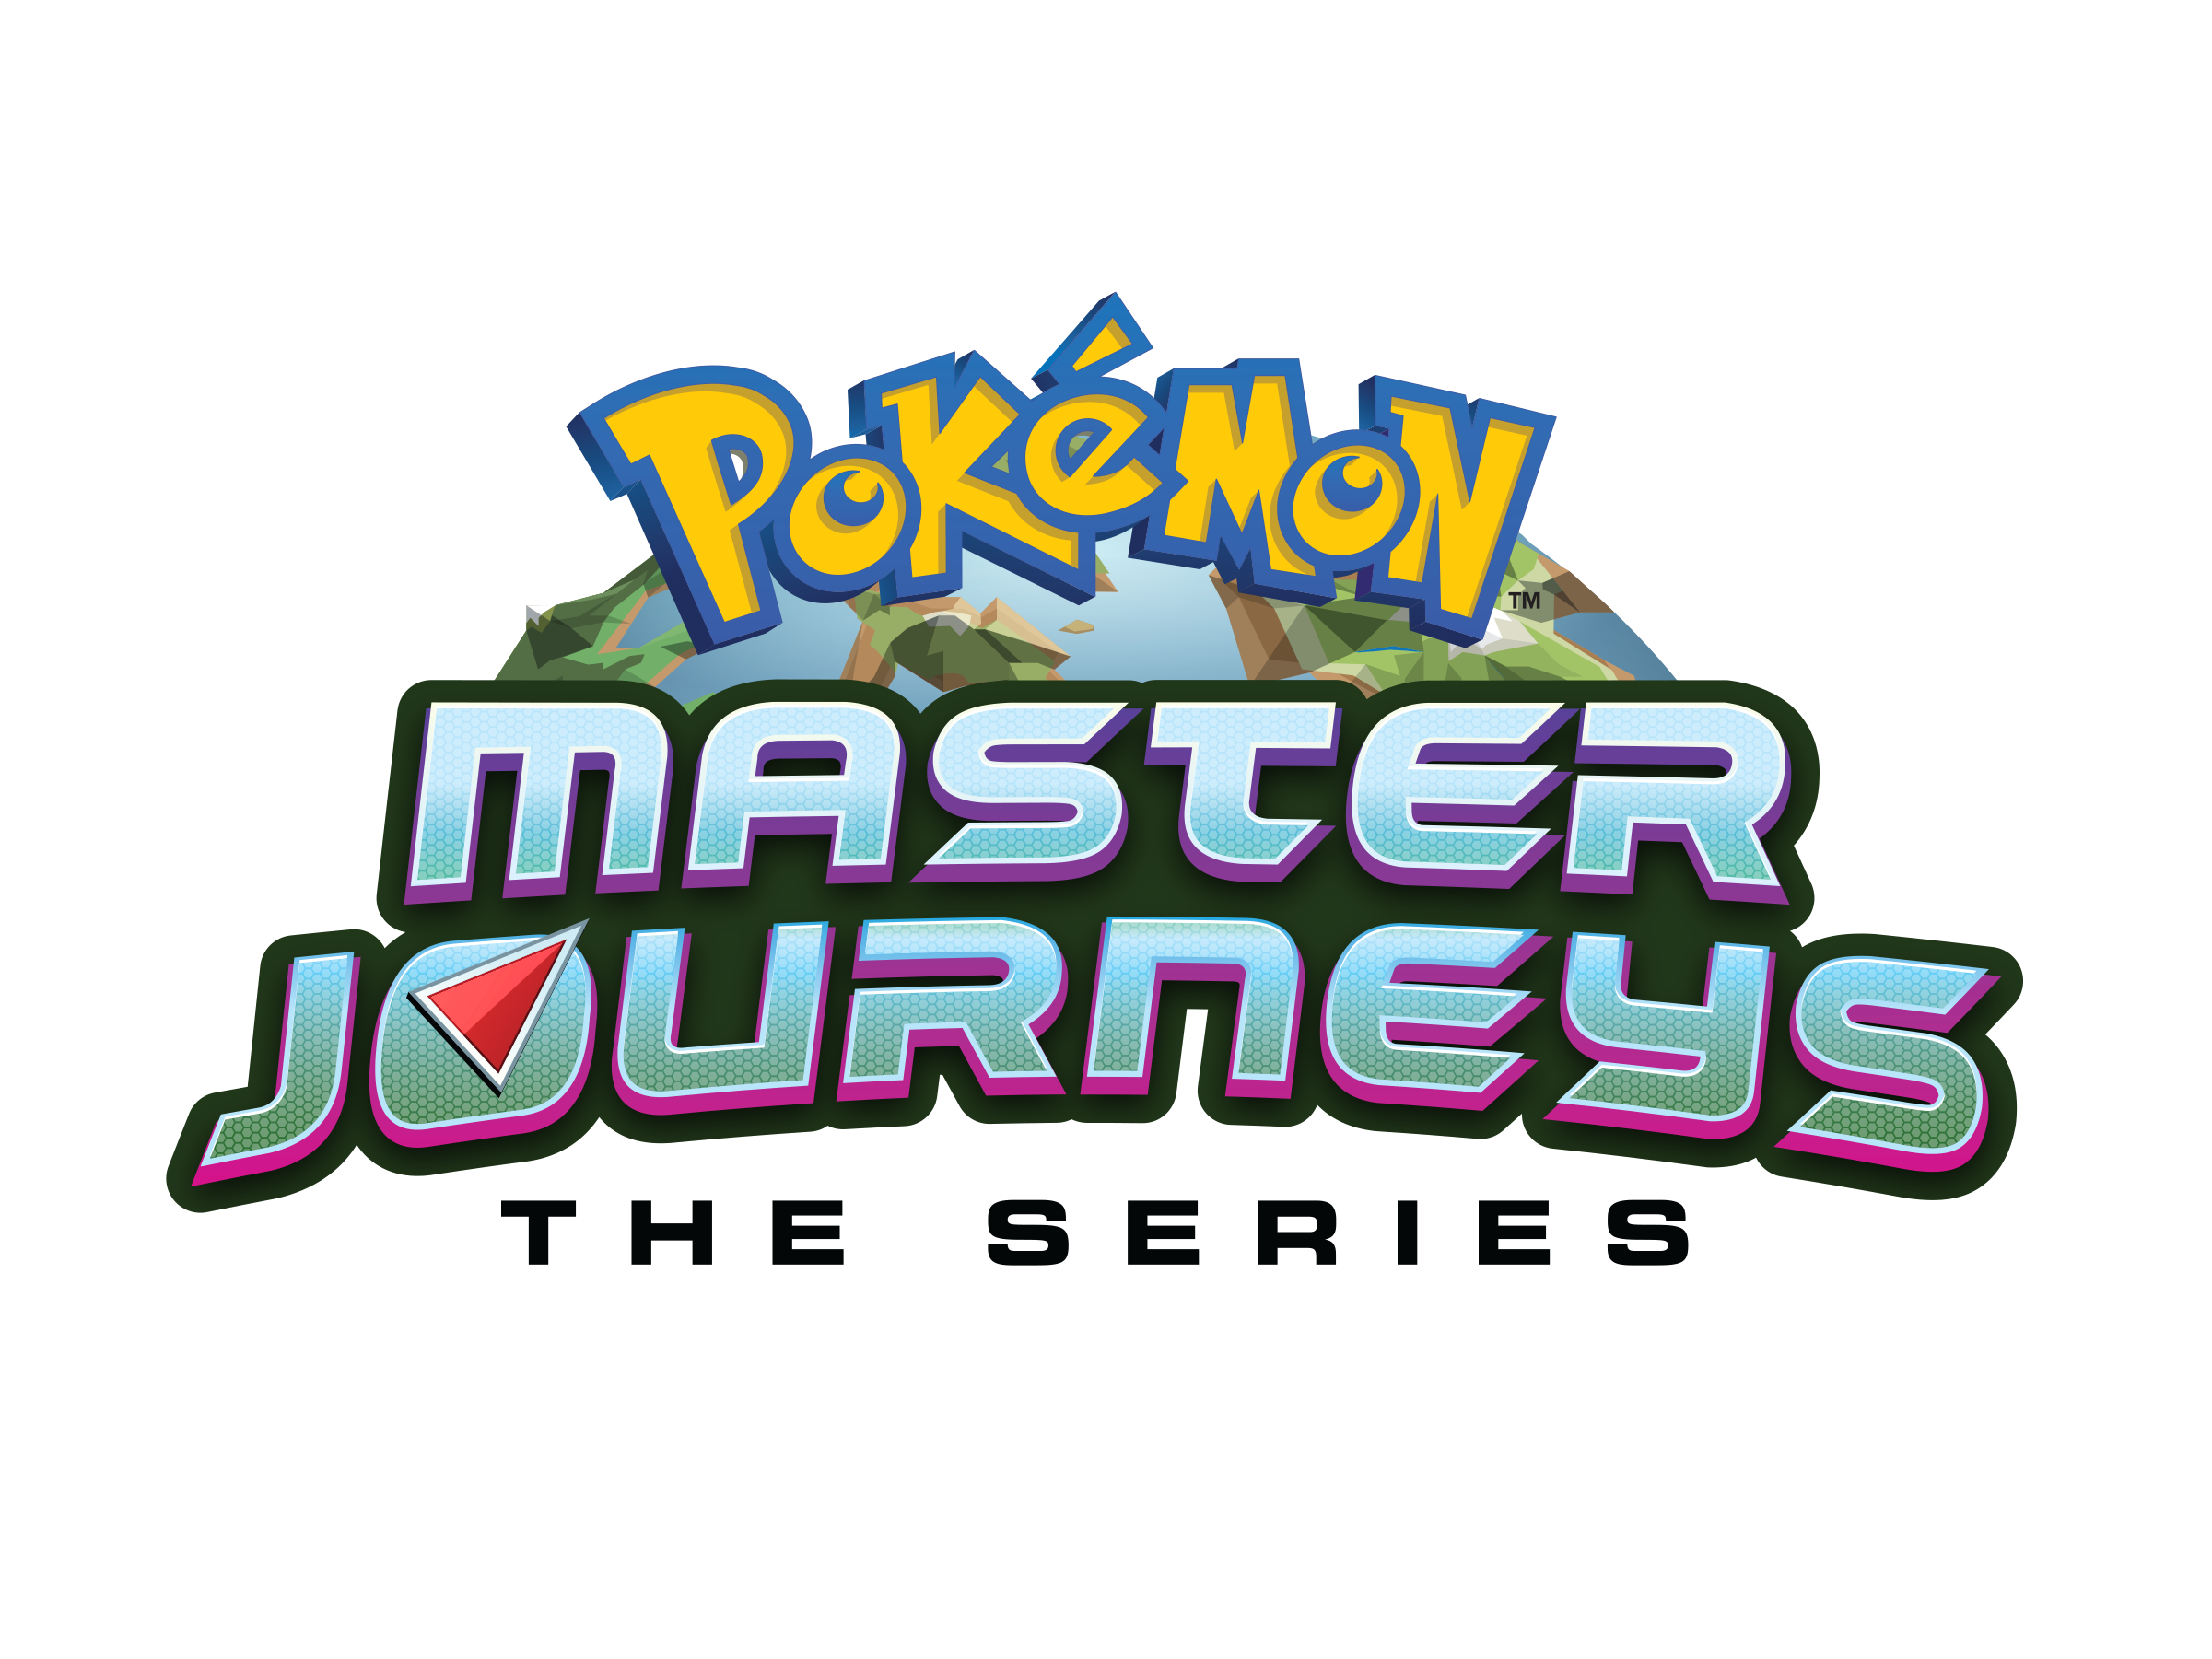 Pokémon master journeys, where can I find all the episodes